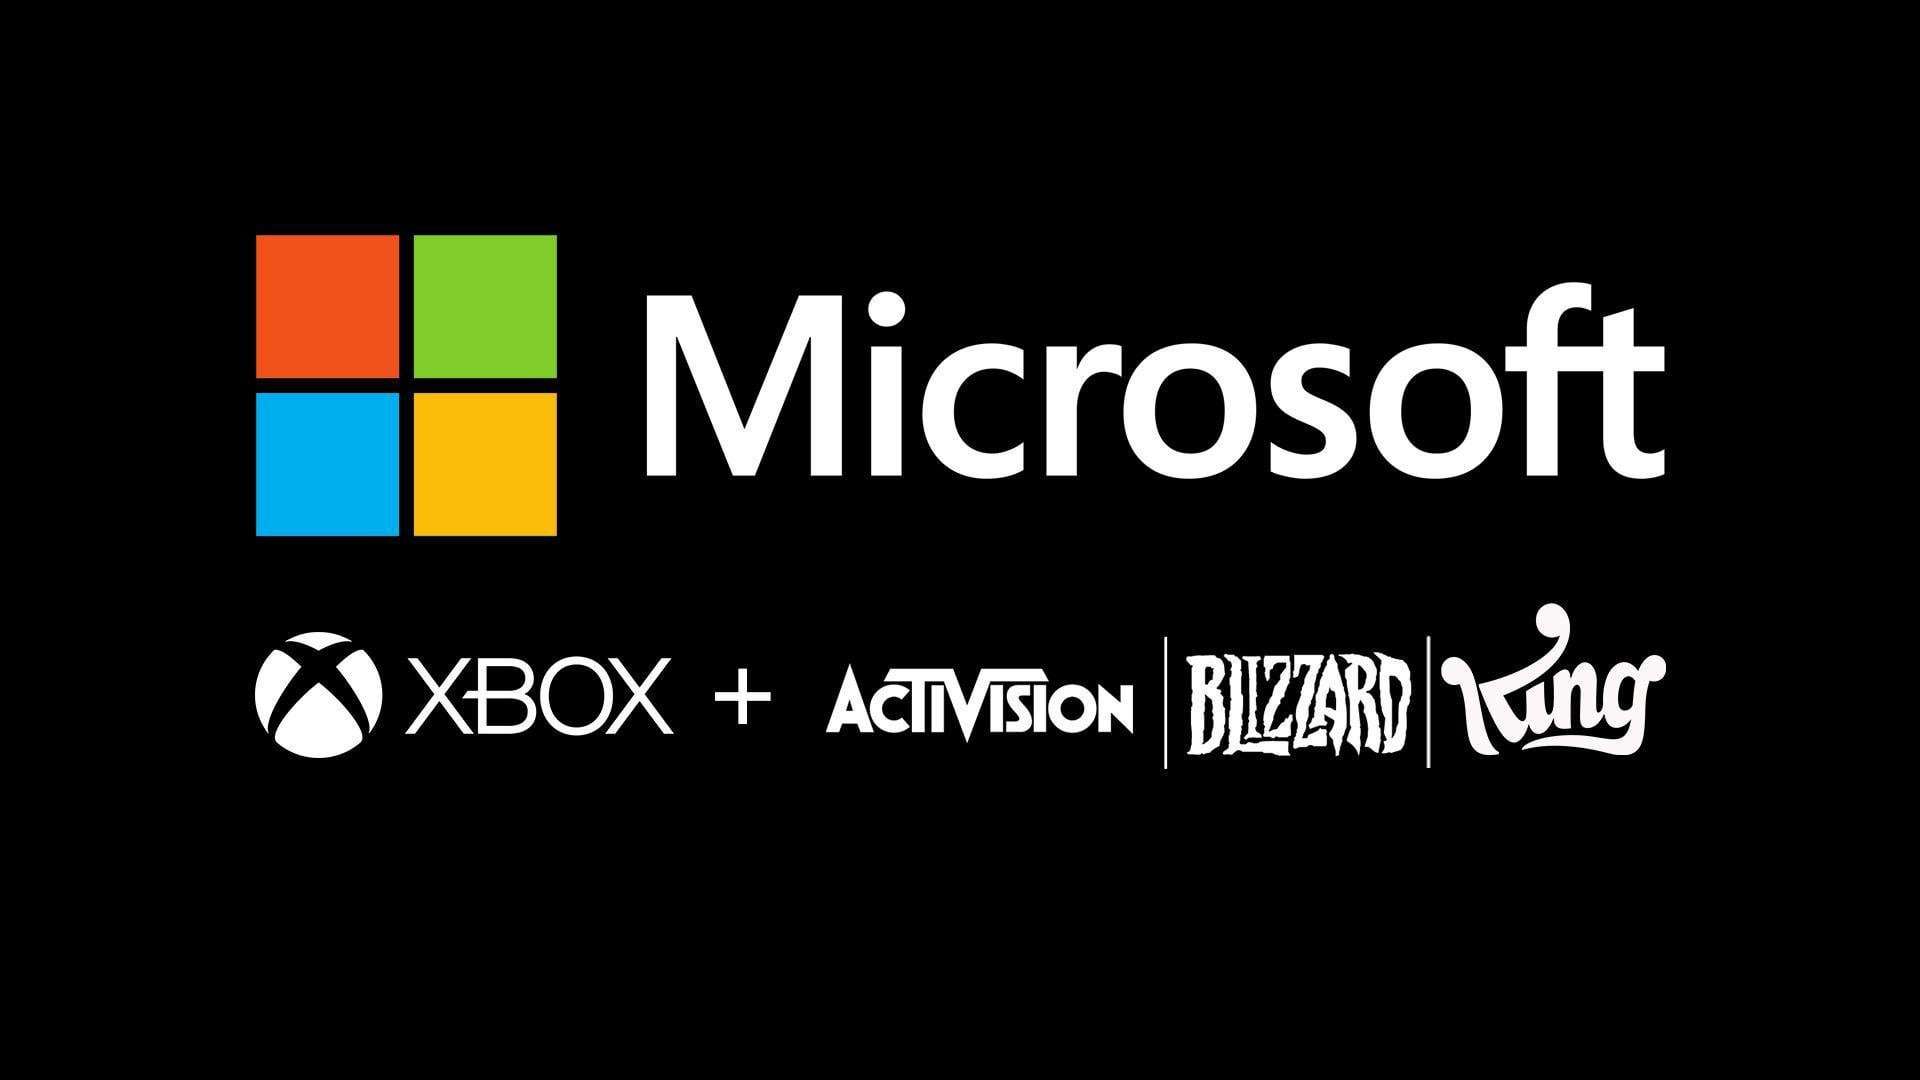 image for Microsoft Buying Activision Blizzard Wouldn’t Substantially Harm Competition, Says Japan’s FTC